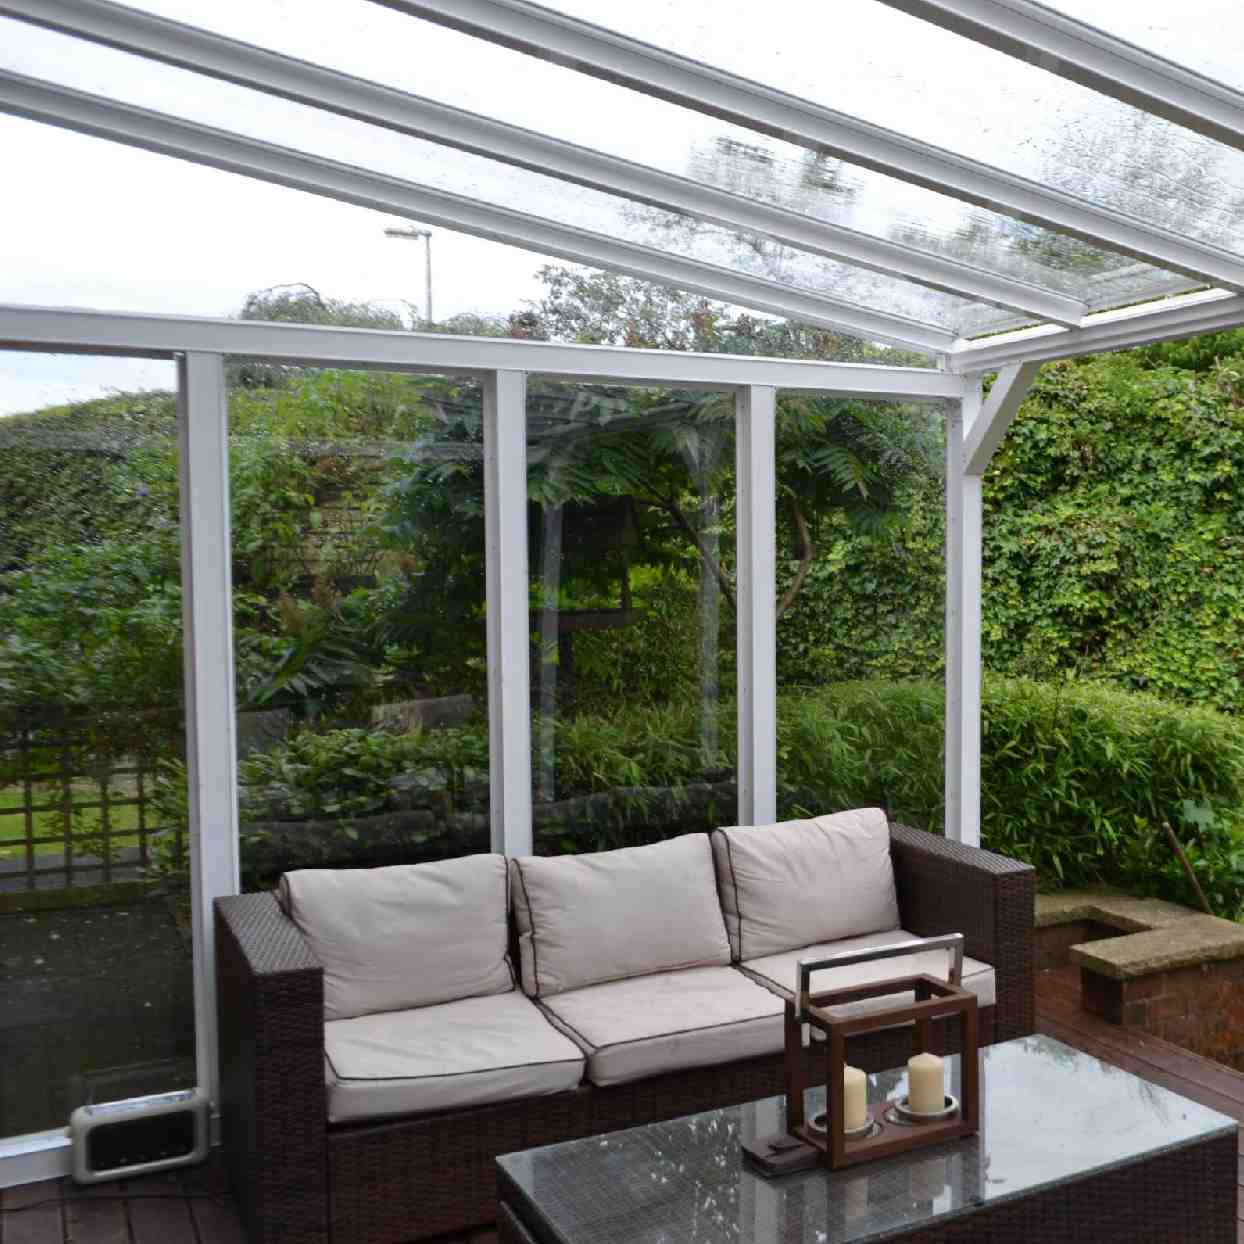 Buy Omega Verandah White with 16mm Polycarbonate Glazing - 2.1m (W) x 3.5m (P), (2) Supporting Posts online today